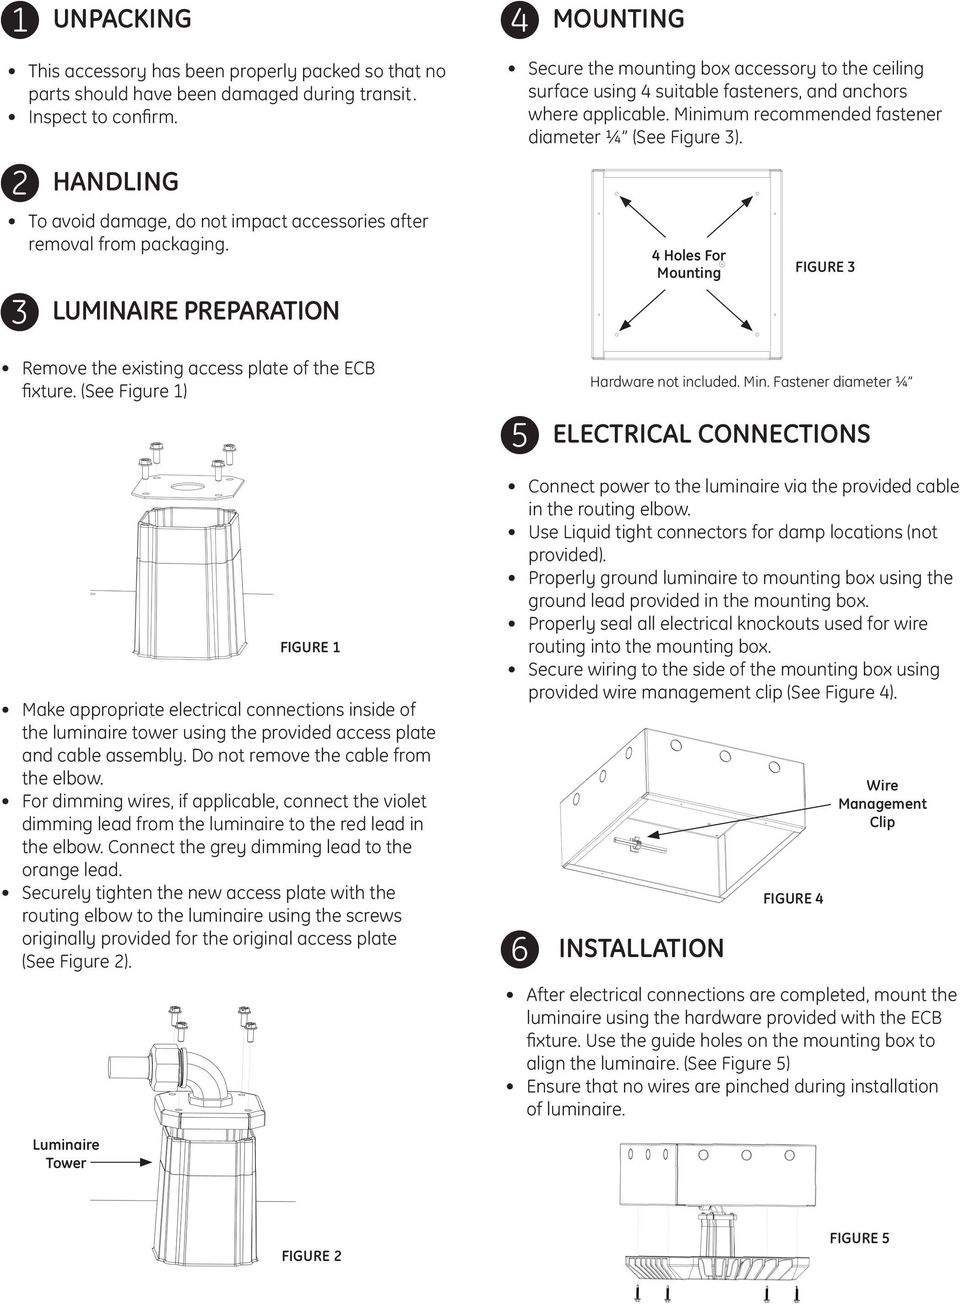 LUMINAIRE PREPARATION Secure the mounting box accessory to the ceiling surface using 4 suitable fasteners, and anchors where applicable. Minimum recommended fastener diameter ¼ (See Figure 3).